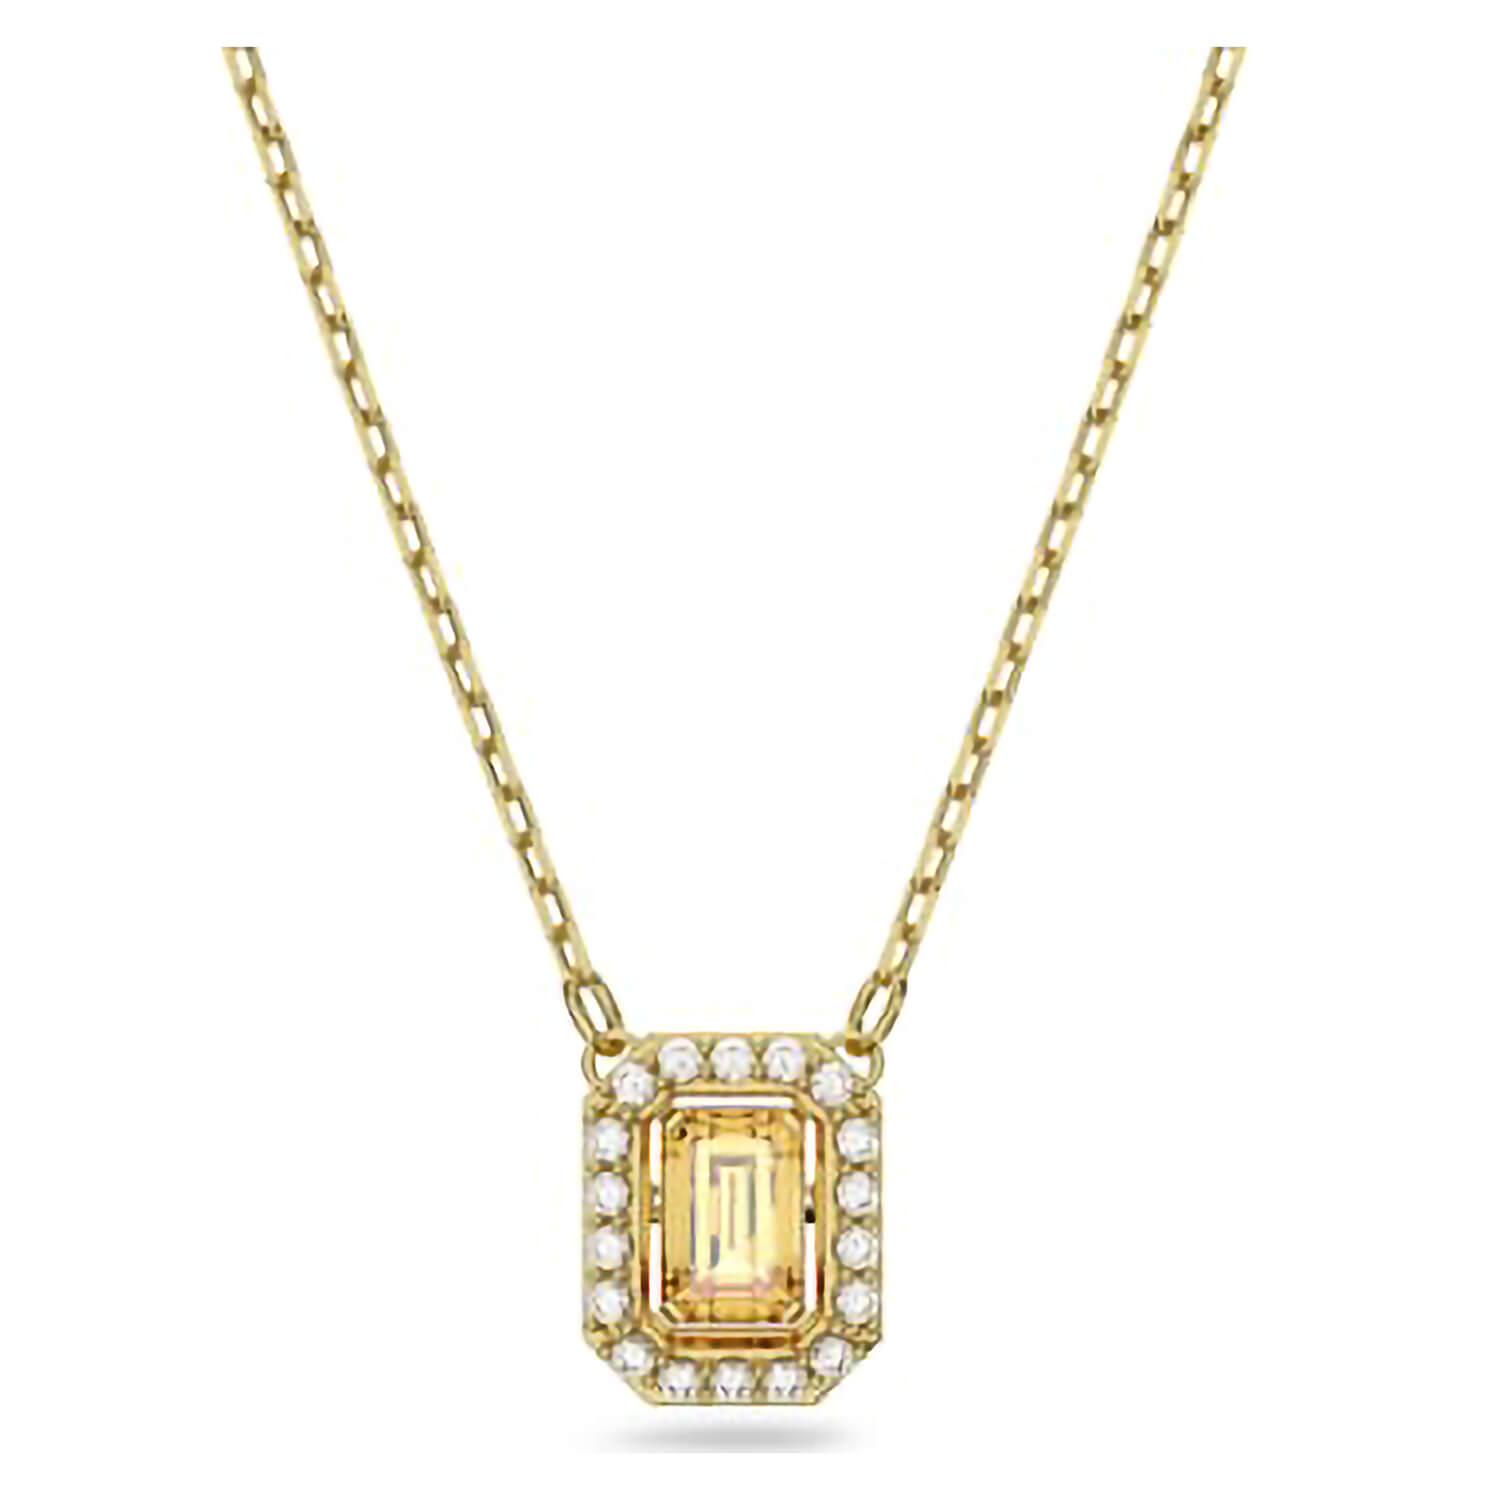 Photos - Pendant / Choker Necklace Swarovski Millenia Gold Plated With Yellow and White Crystal Pendant Neckl 